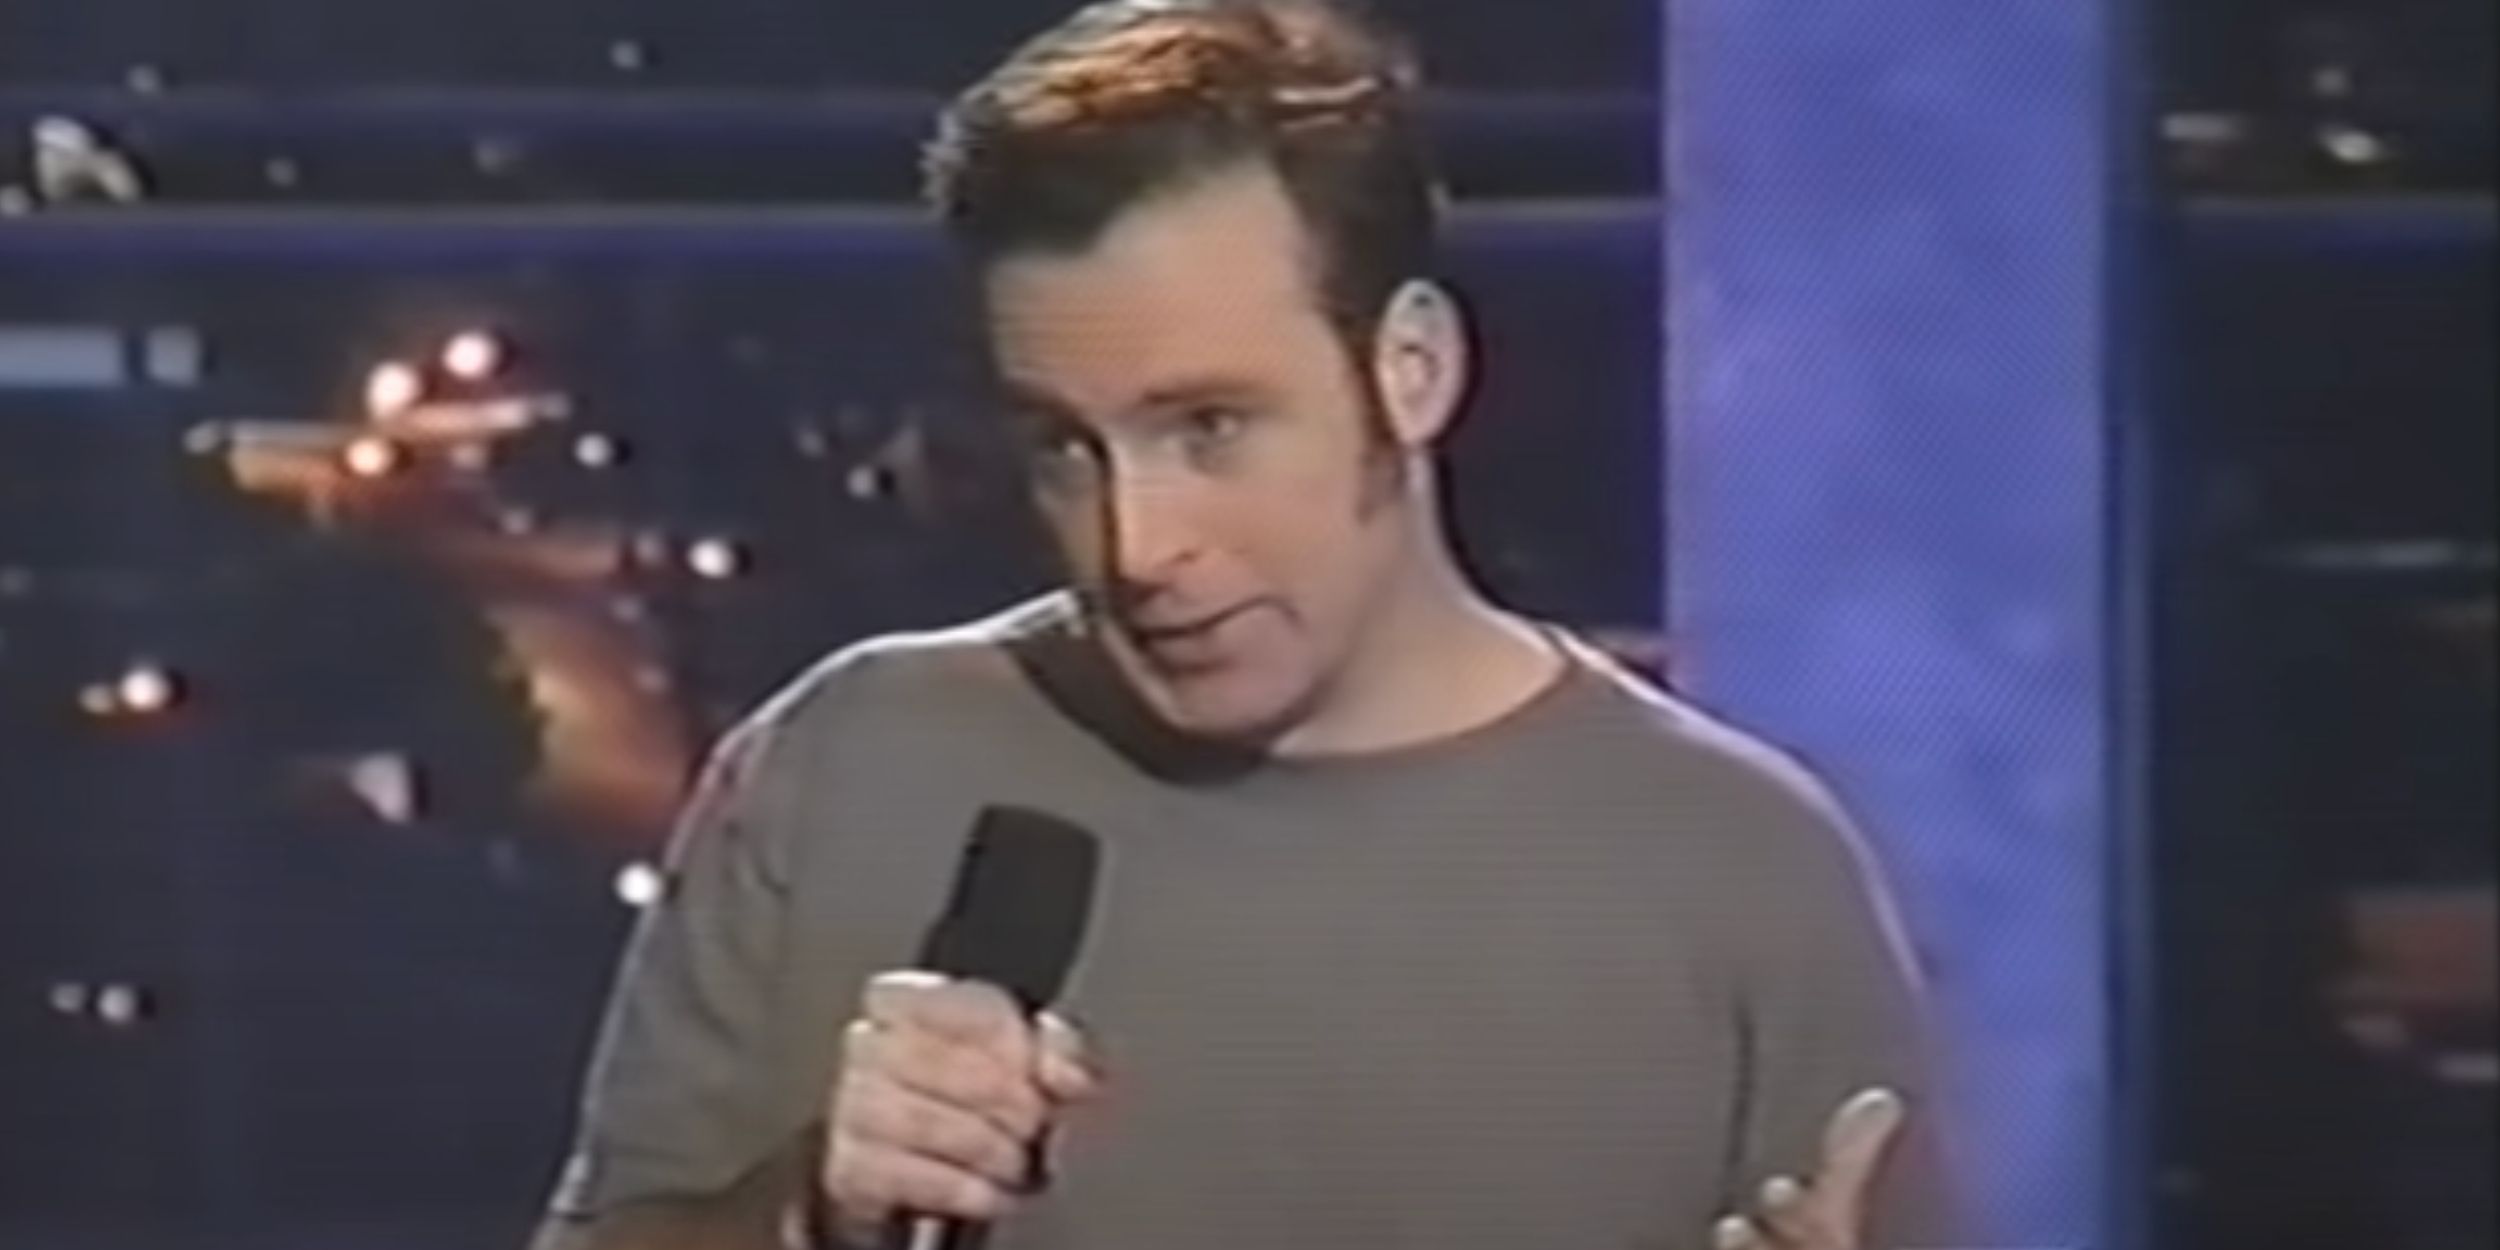 Bob Odenkirk performs stand-up comedy